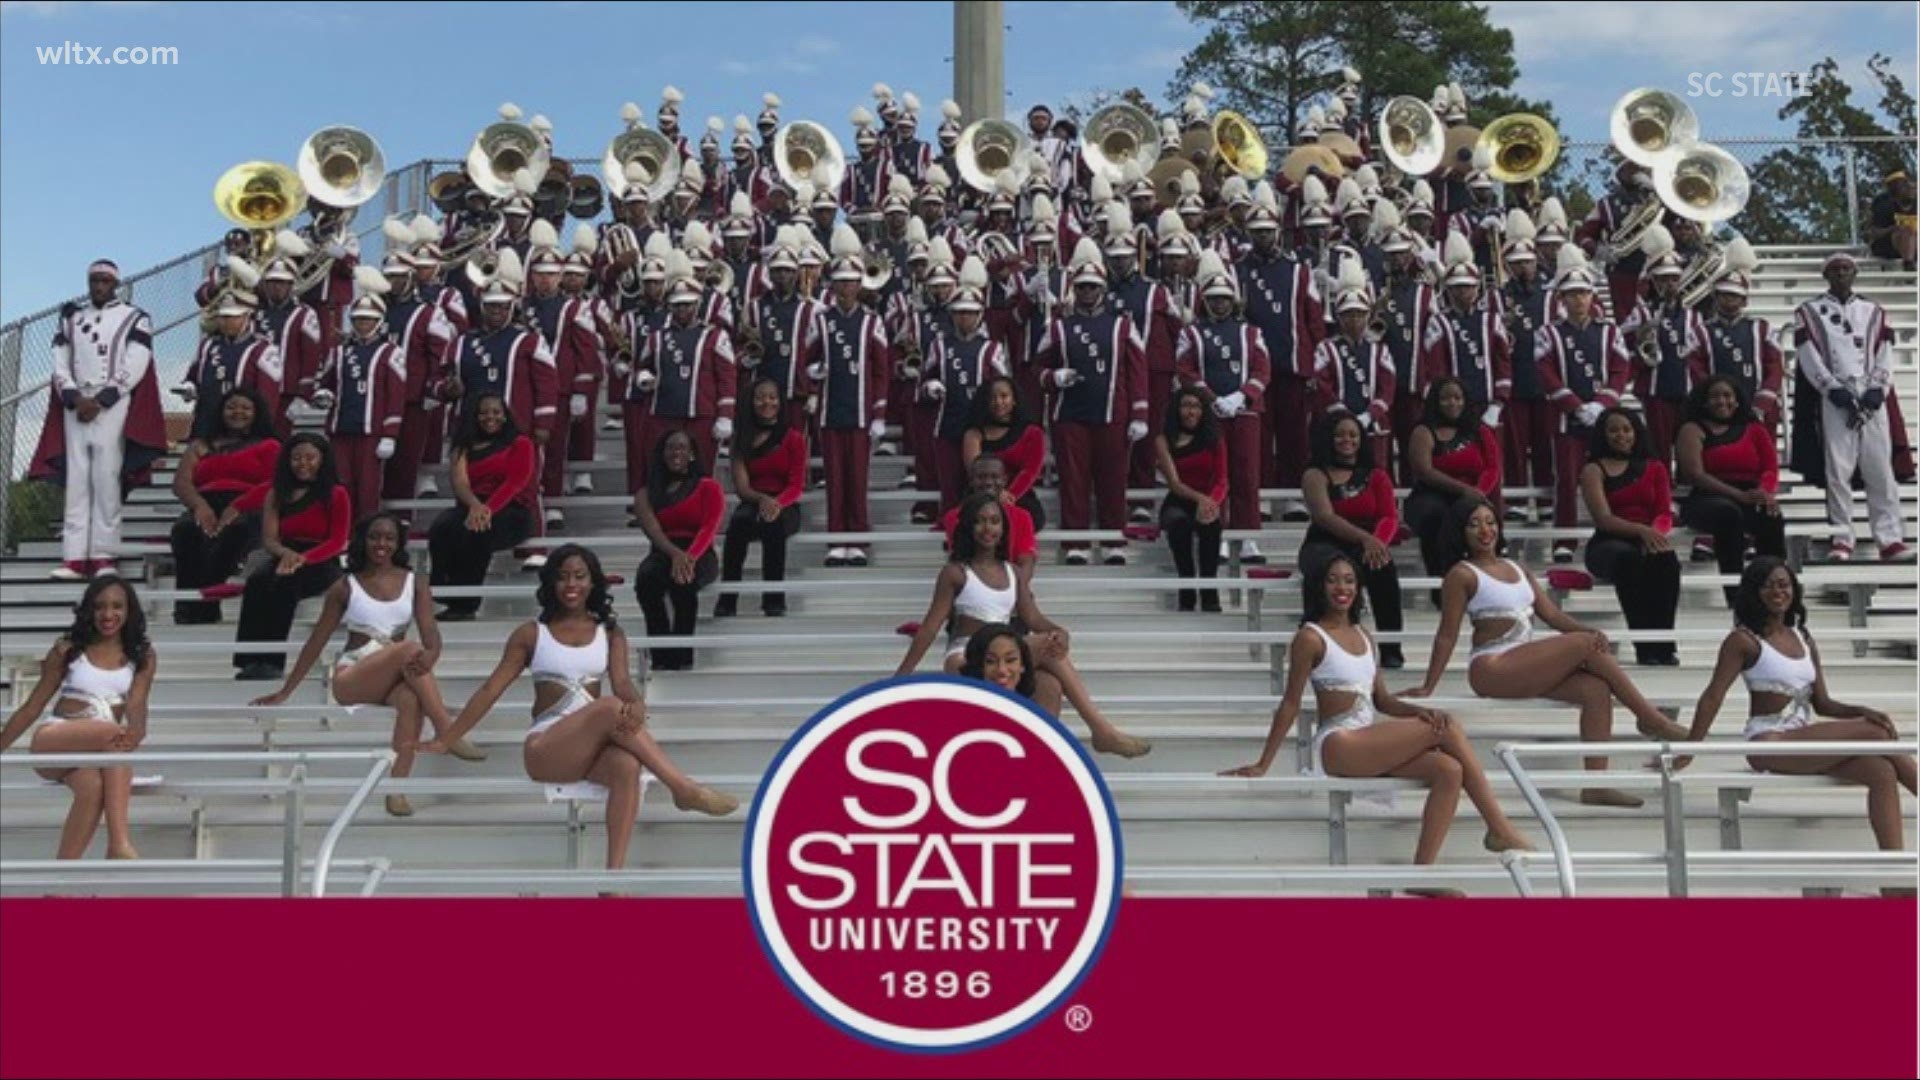 Inauguration celebration to feature SC State marching band